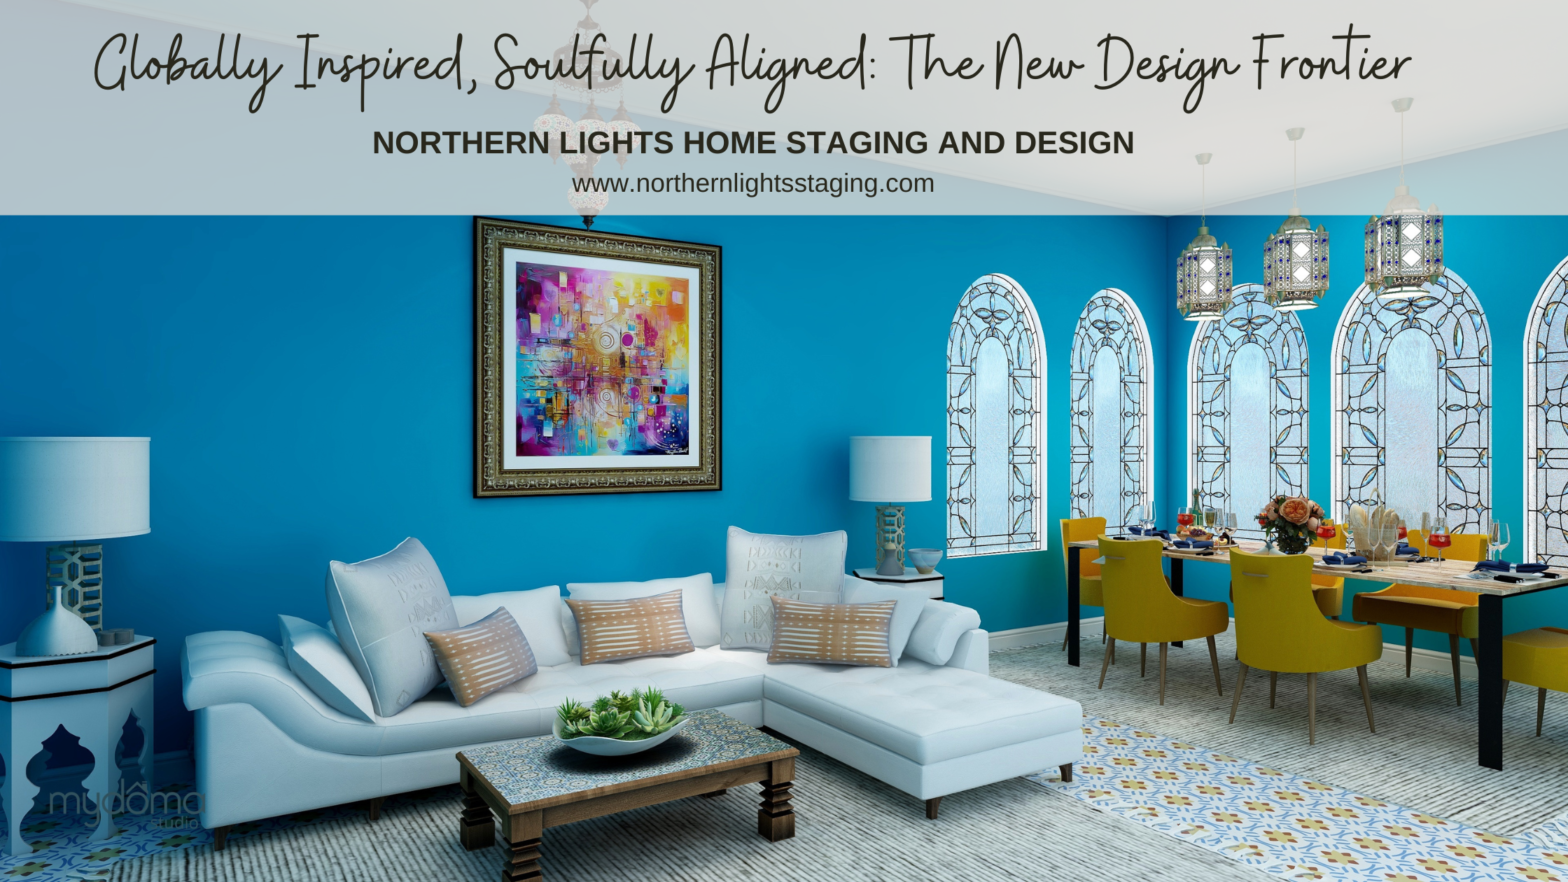 Globally Inspired, Soulfully Aligned: The New Design Frontier